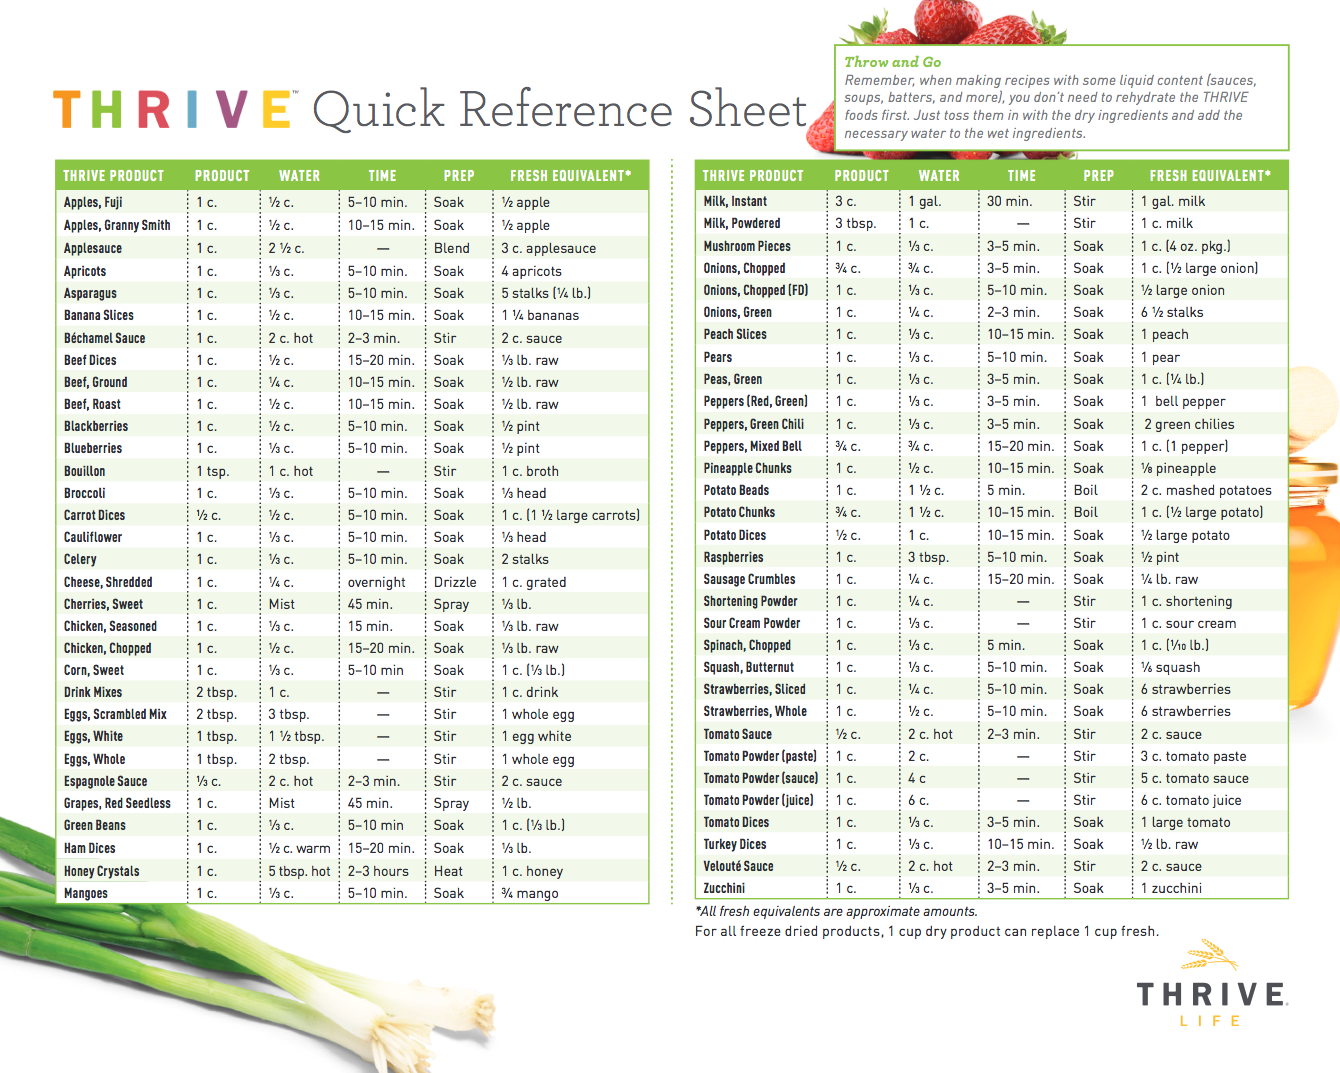 Quick Reference Chart for Thrive Life Freeze Dried Foods - rehydration